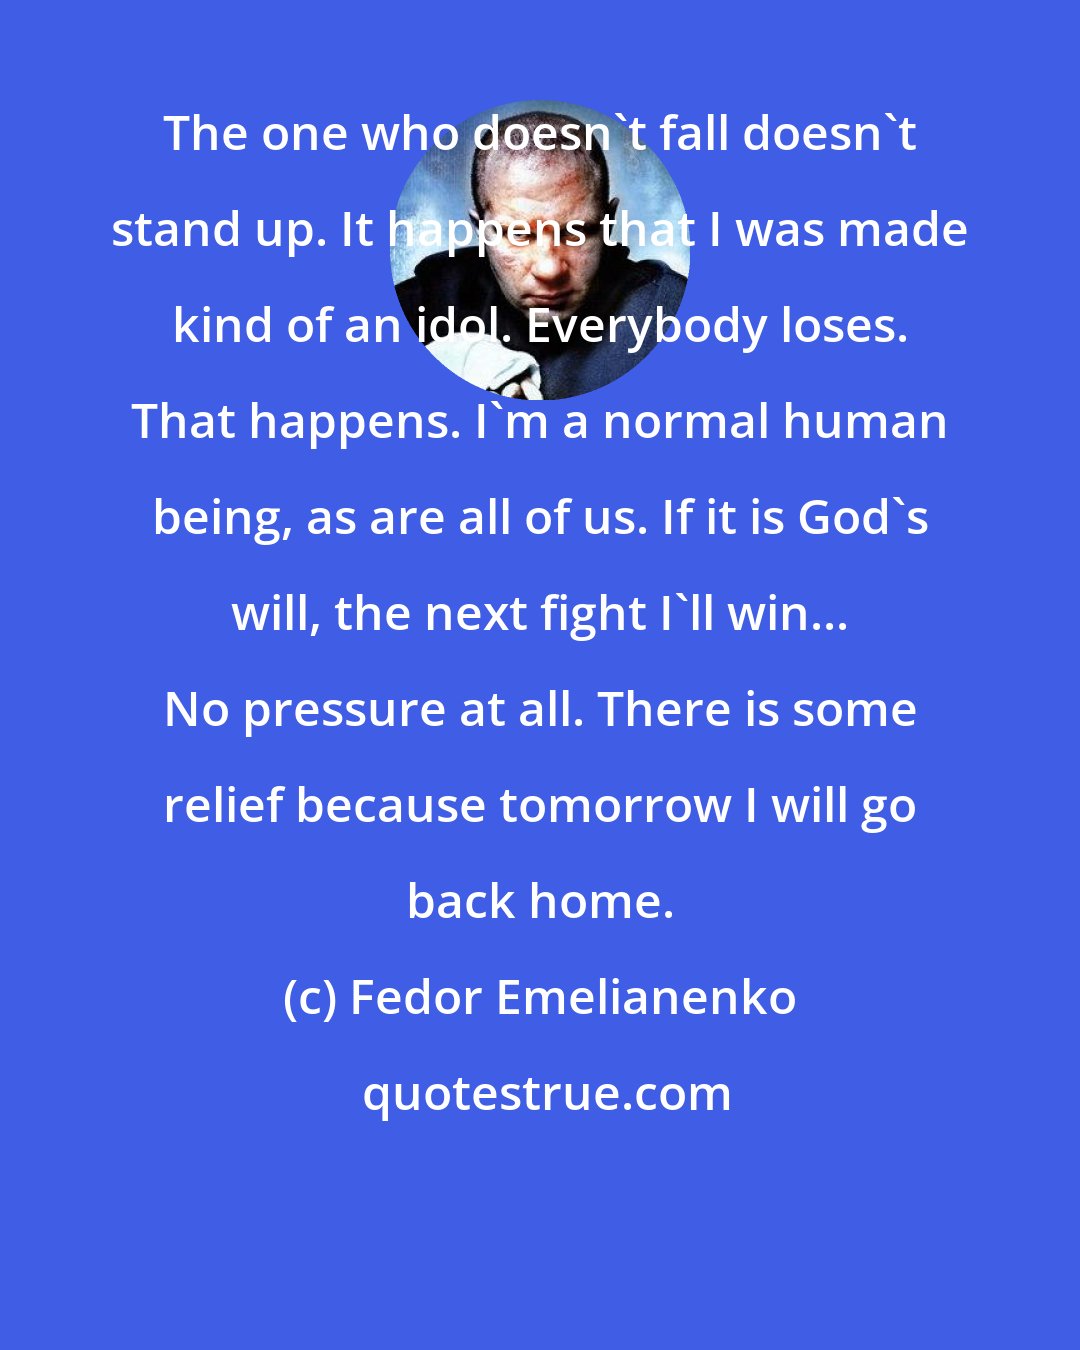 Fedor Emelianenko: The one who doesn't fall doesn't stand up. It happens that I was made kind of an idol. Everybody loses. That happens. I'm a normal human being, as are all of us. If it is God's will, the next fight I'll win... No pressure at all. There is some relief because tomorrow I will go back home.